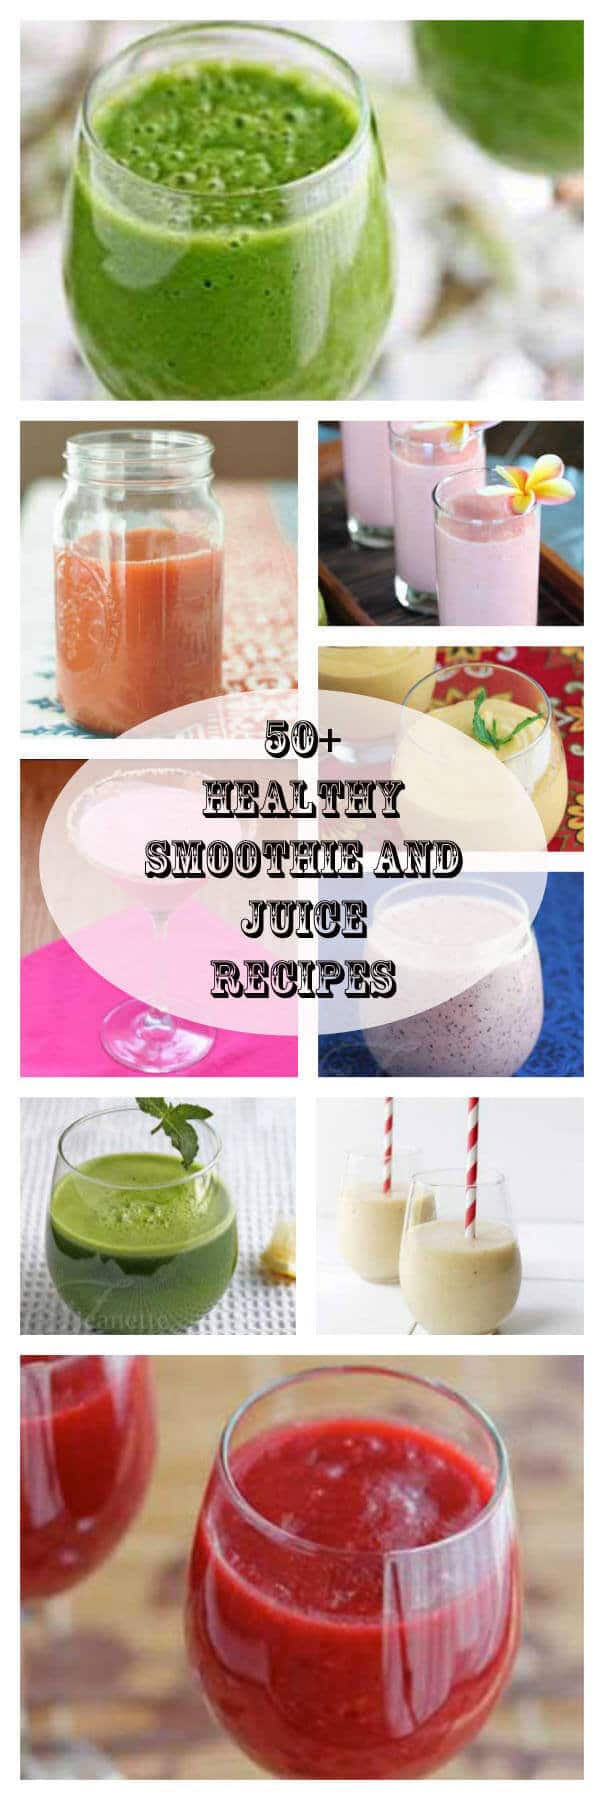 50 Healthy Smoothie and Juice Recipes